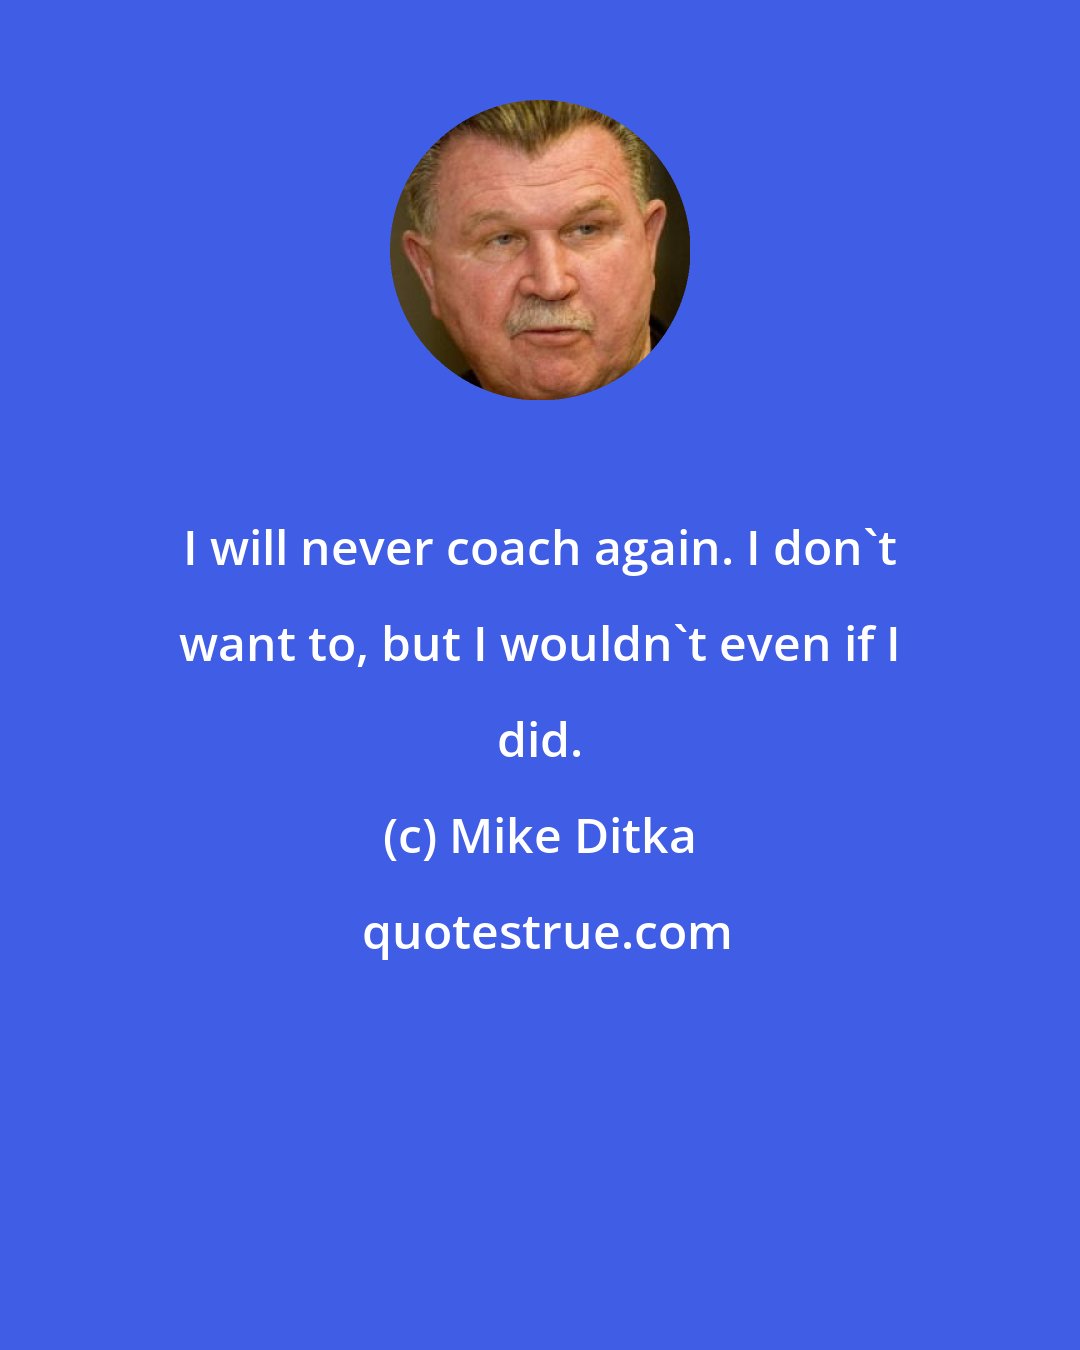 Mike Ditka: I will never coach again. I don't want to, but I wouldn't even if I did.